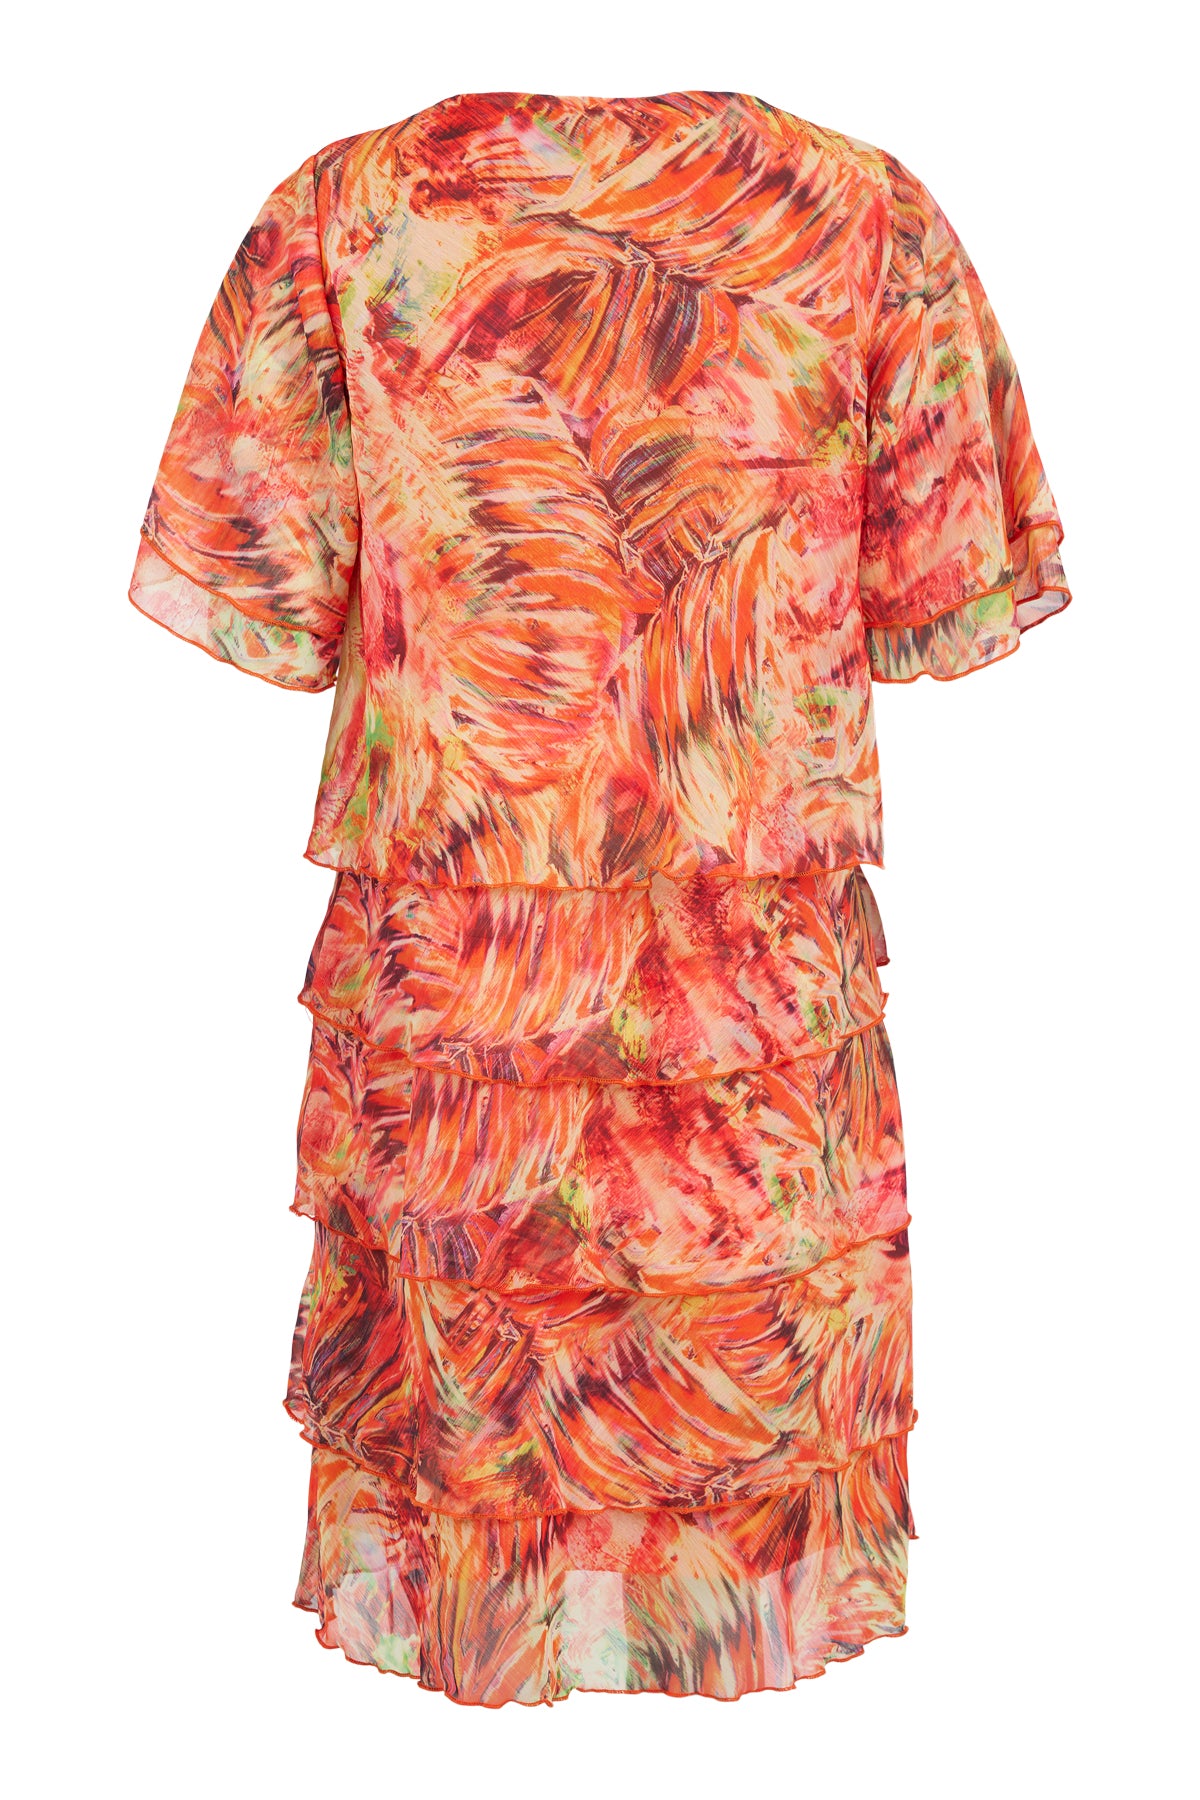 Orange Tired Dress With Abstract Print & Chiffon Sleeve Detailing